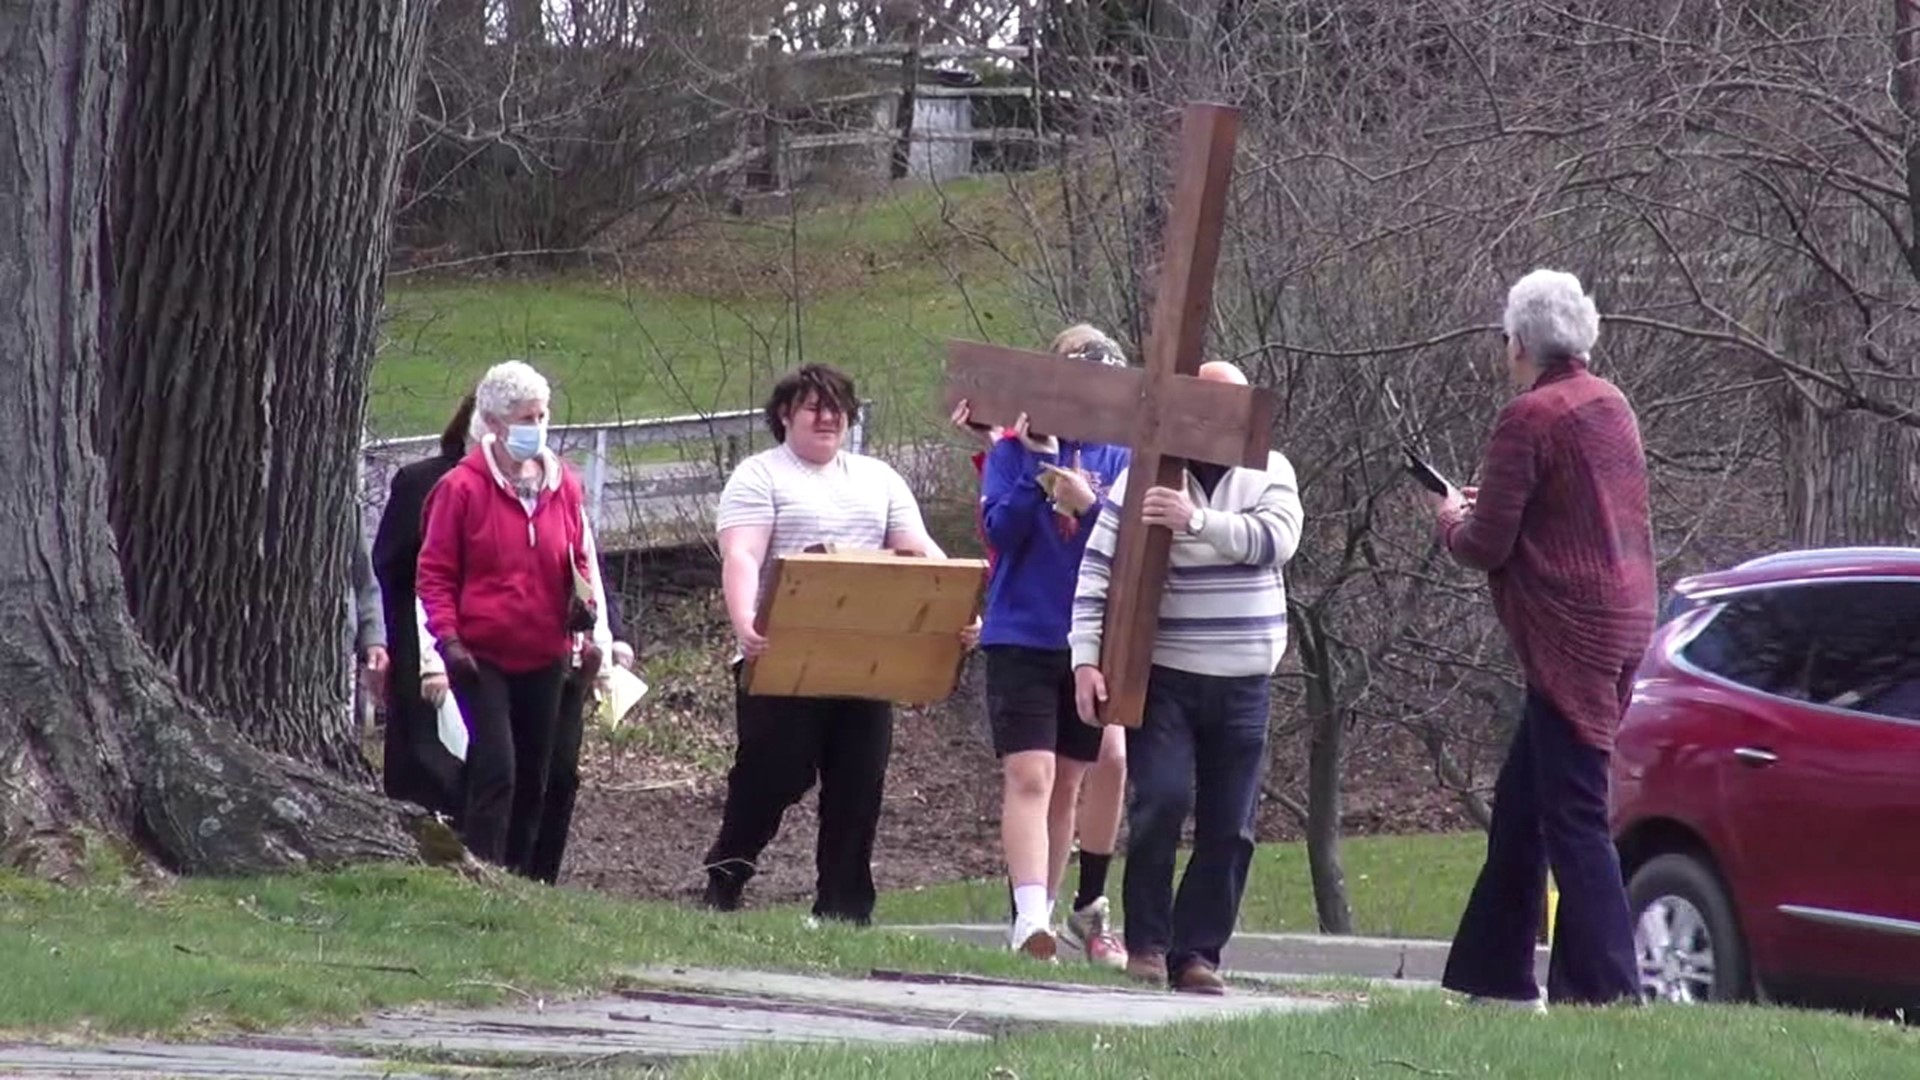 The Good Friday tradition returned to Susquehanna County after a hiatus due to COVID.